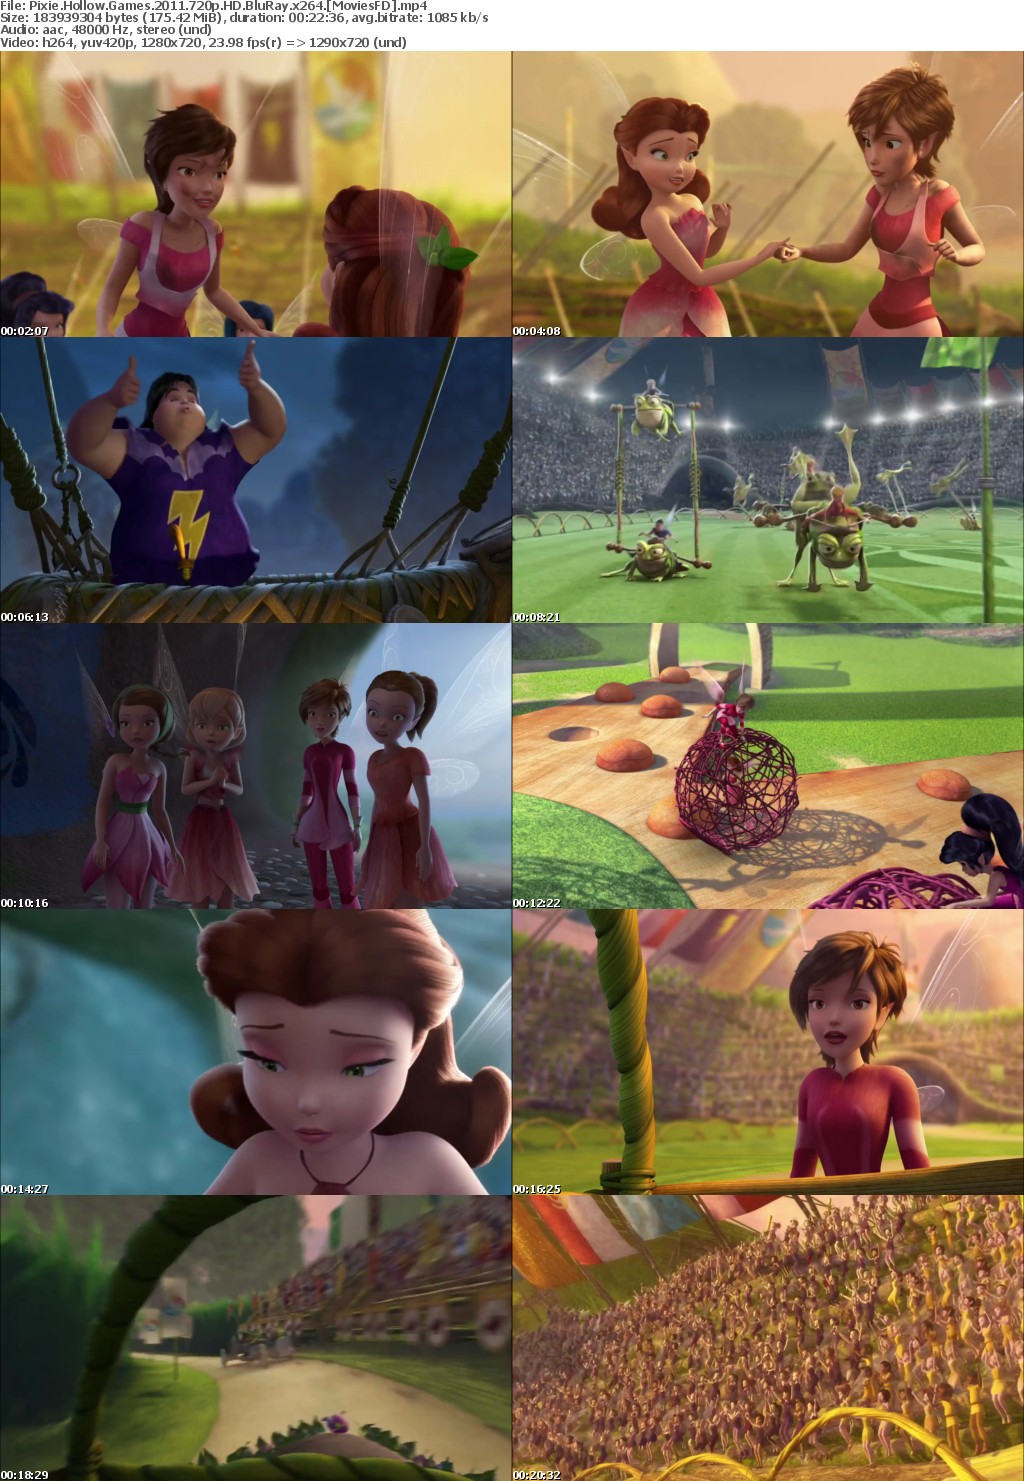 Pixie Hollow Games 2011 720p HD BluRay x264 MoviesFD